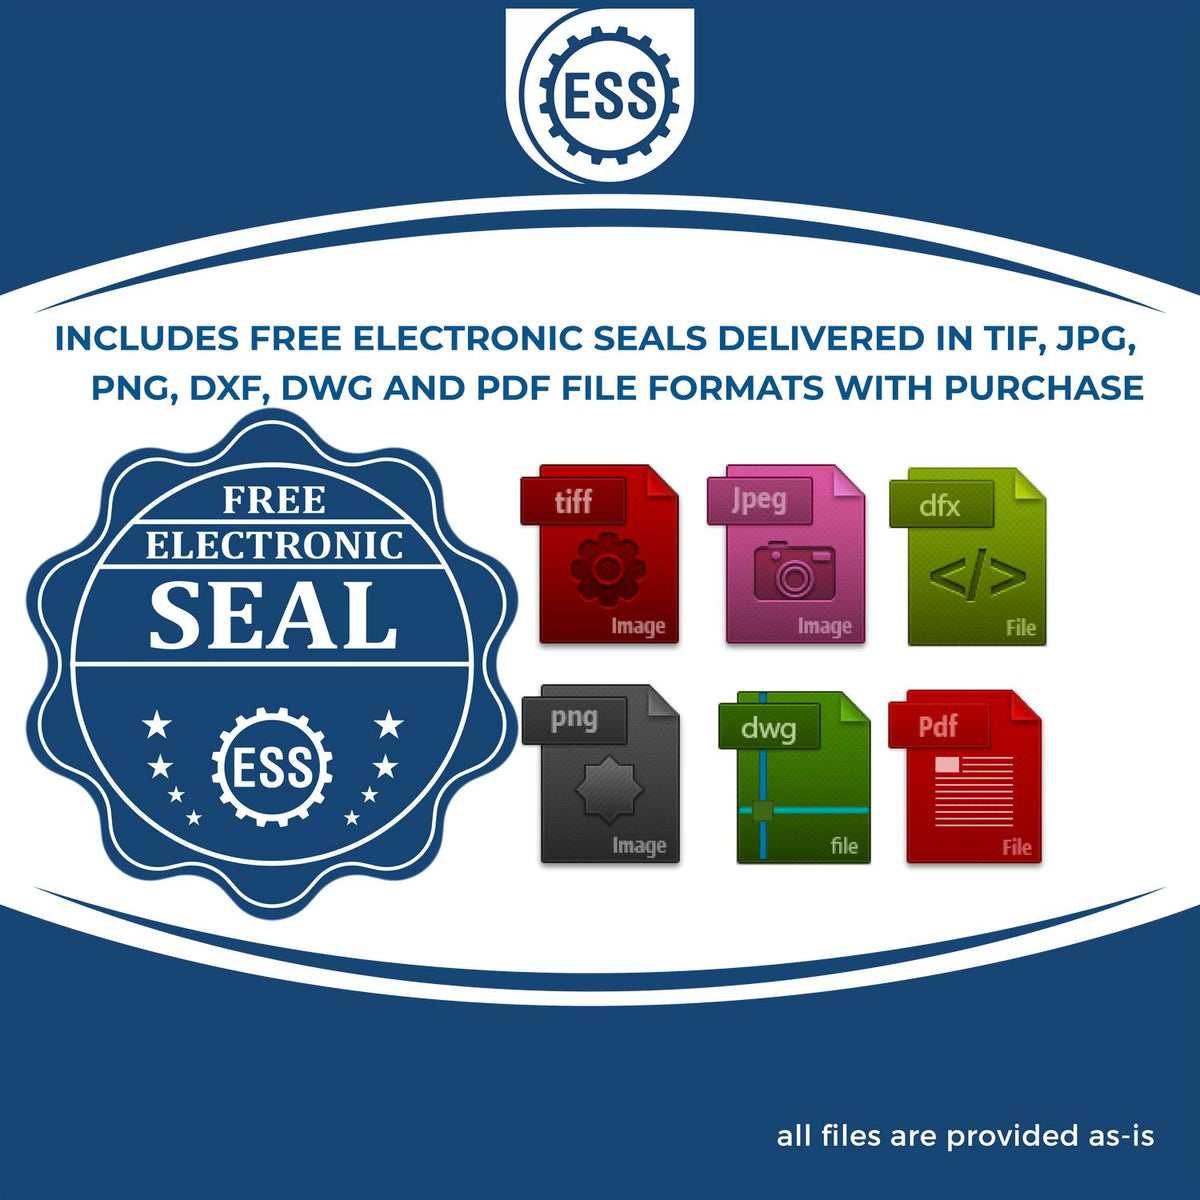 An infographic for the free electronic seal for the Self-Inking Rectangular Wyoming Notary Stamp illustrating the different file type icons such as DXF, DWG, TIF, JPG and PNG.